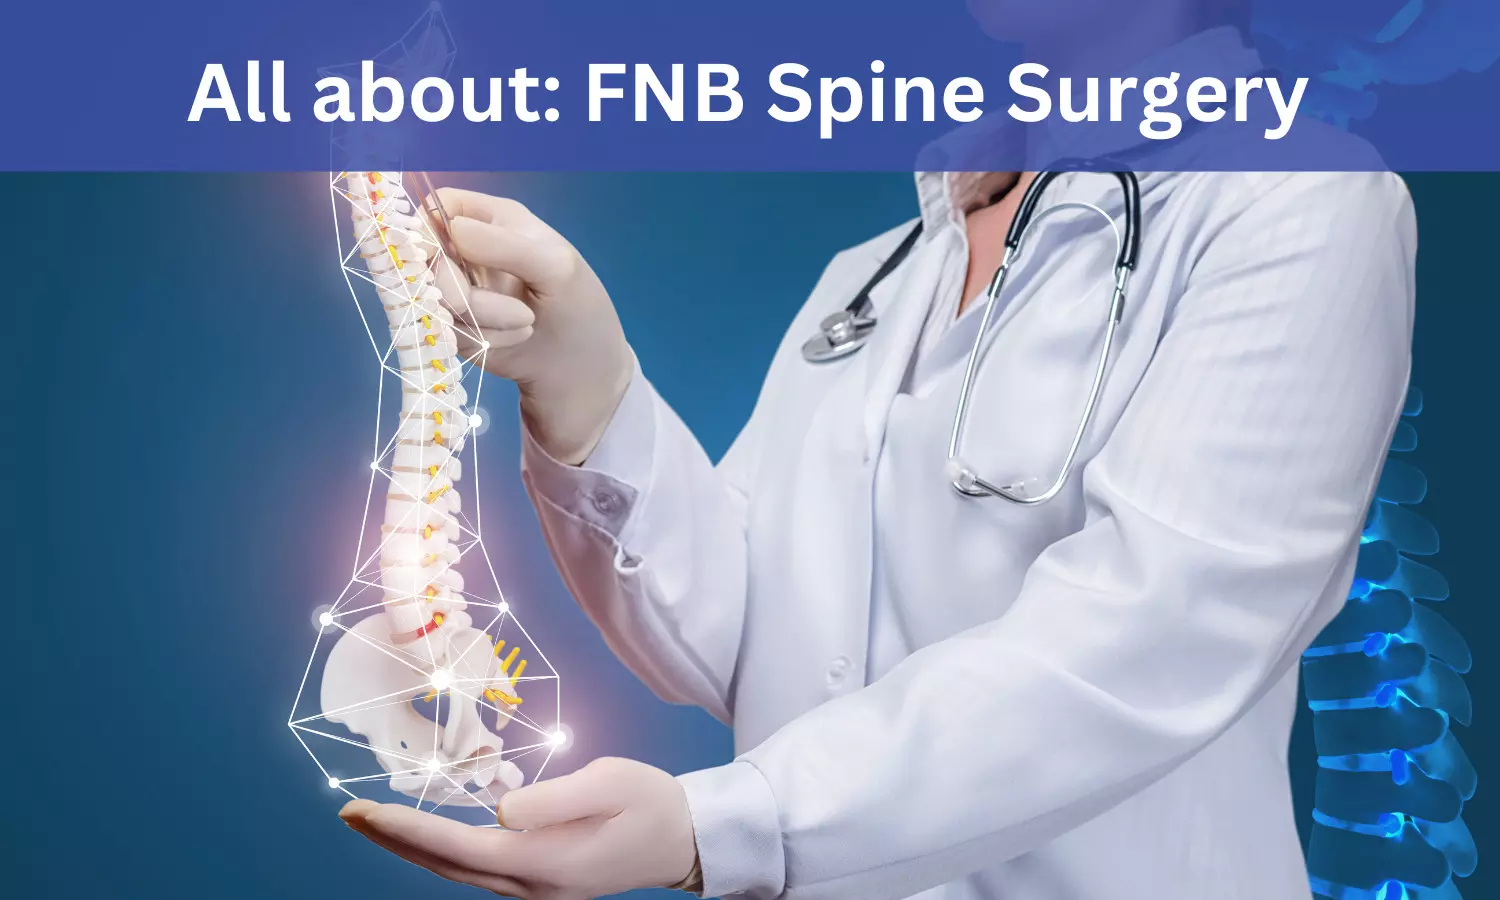 FNB Spine Surgery: Admissions, Medical Colleges, Fees, Eligibility Criteria Details